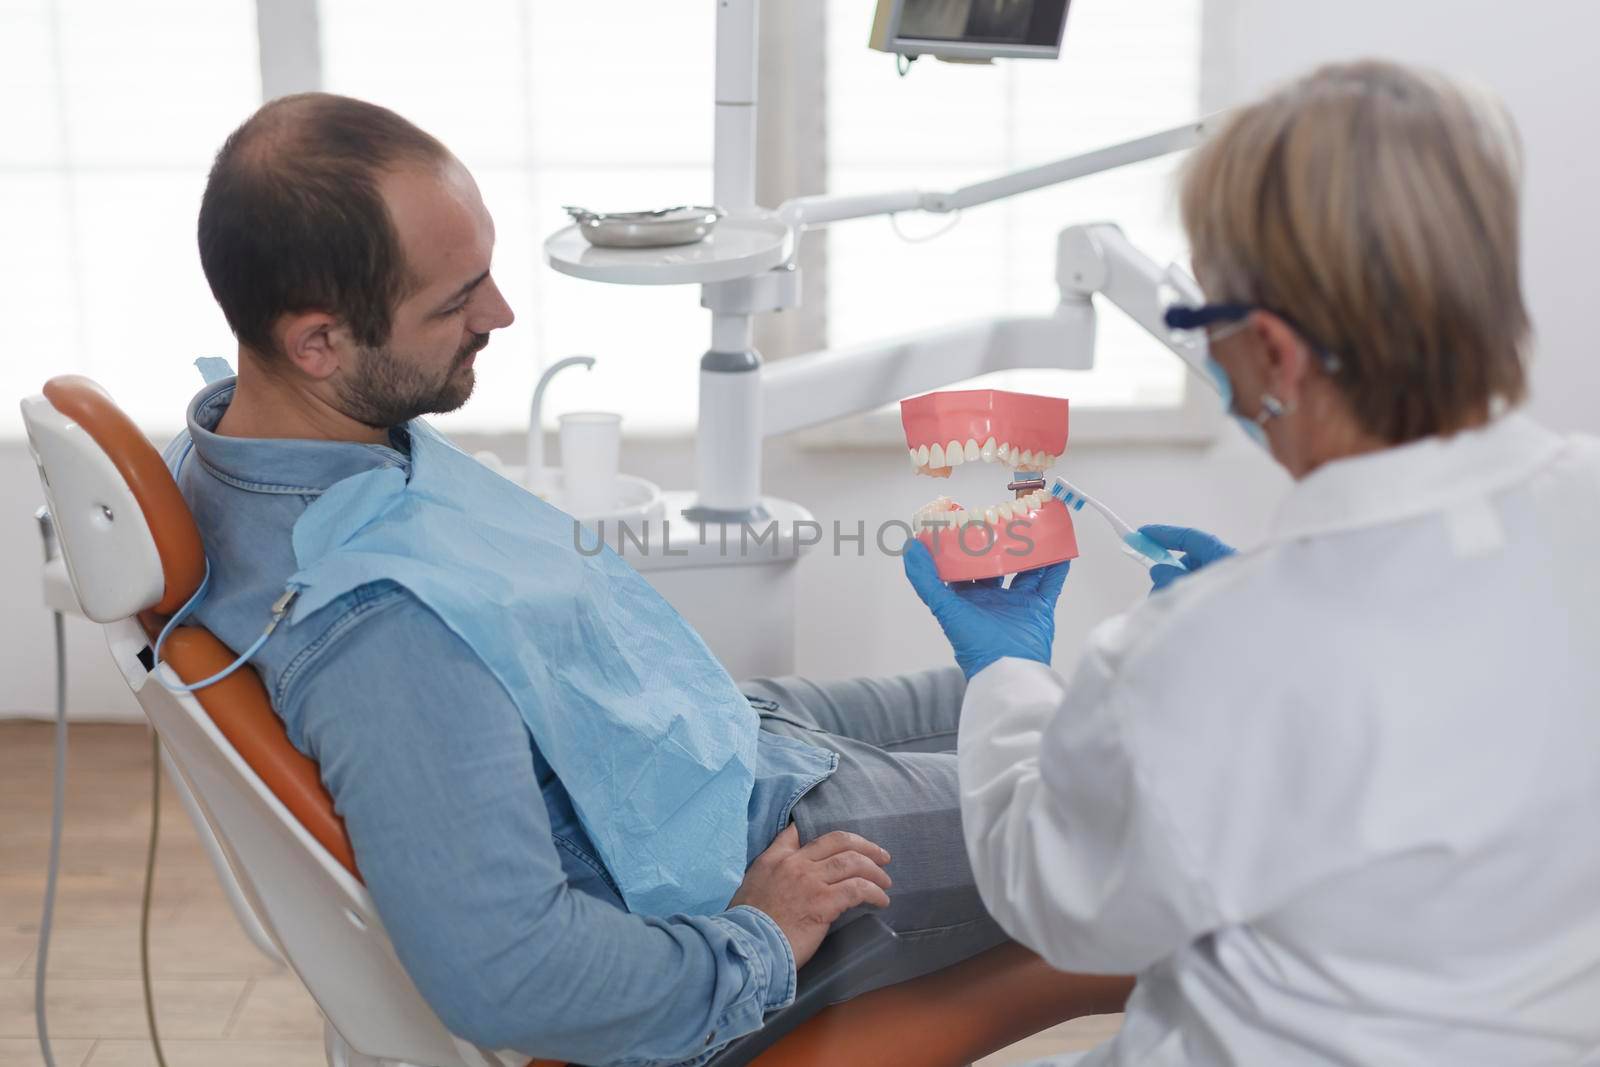 Dpecialist orthodontist showing ceramic jaw model to patient by DCStudio